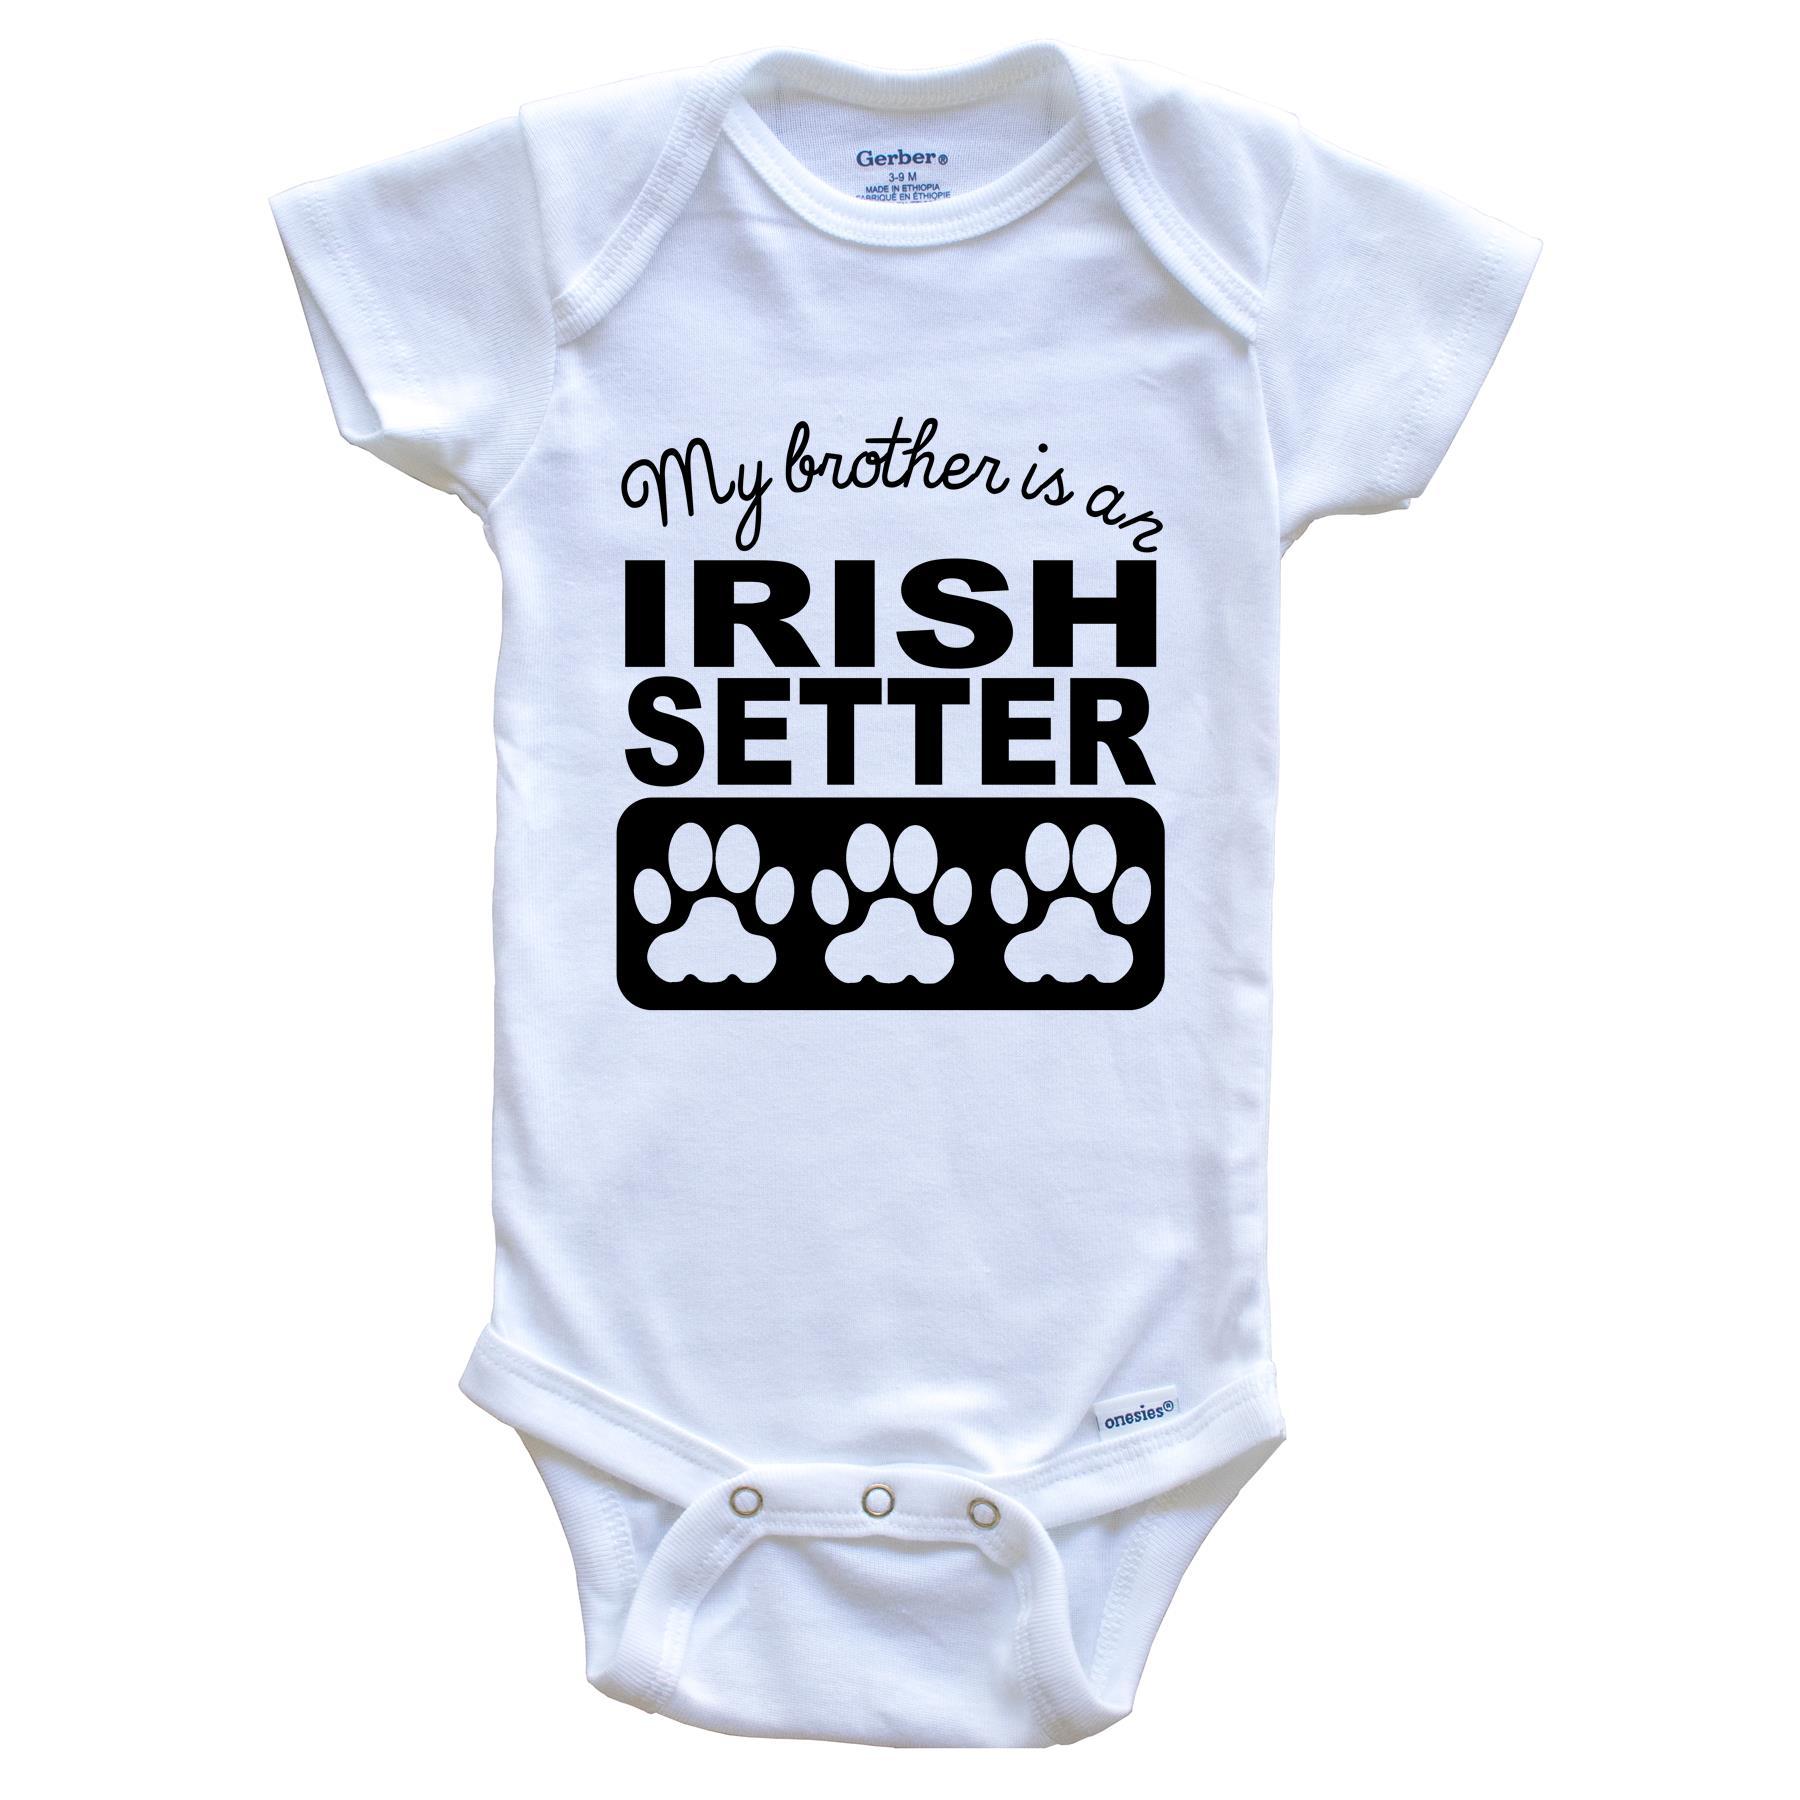 My Brother Is An Irish Setter Baby Onesie